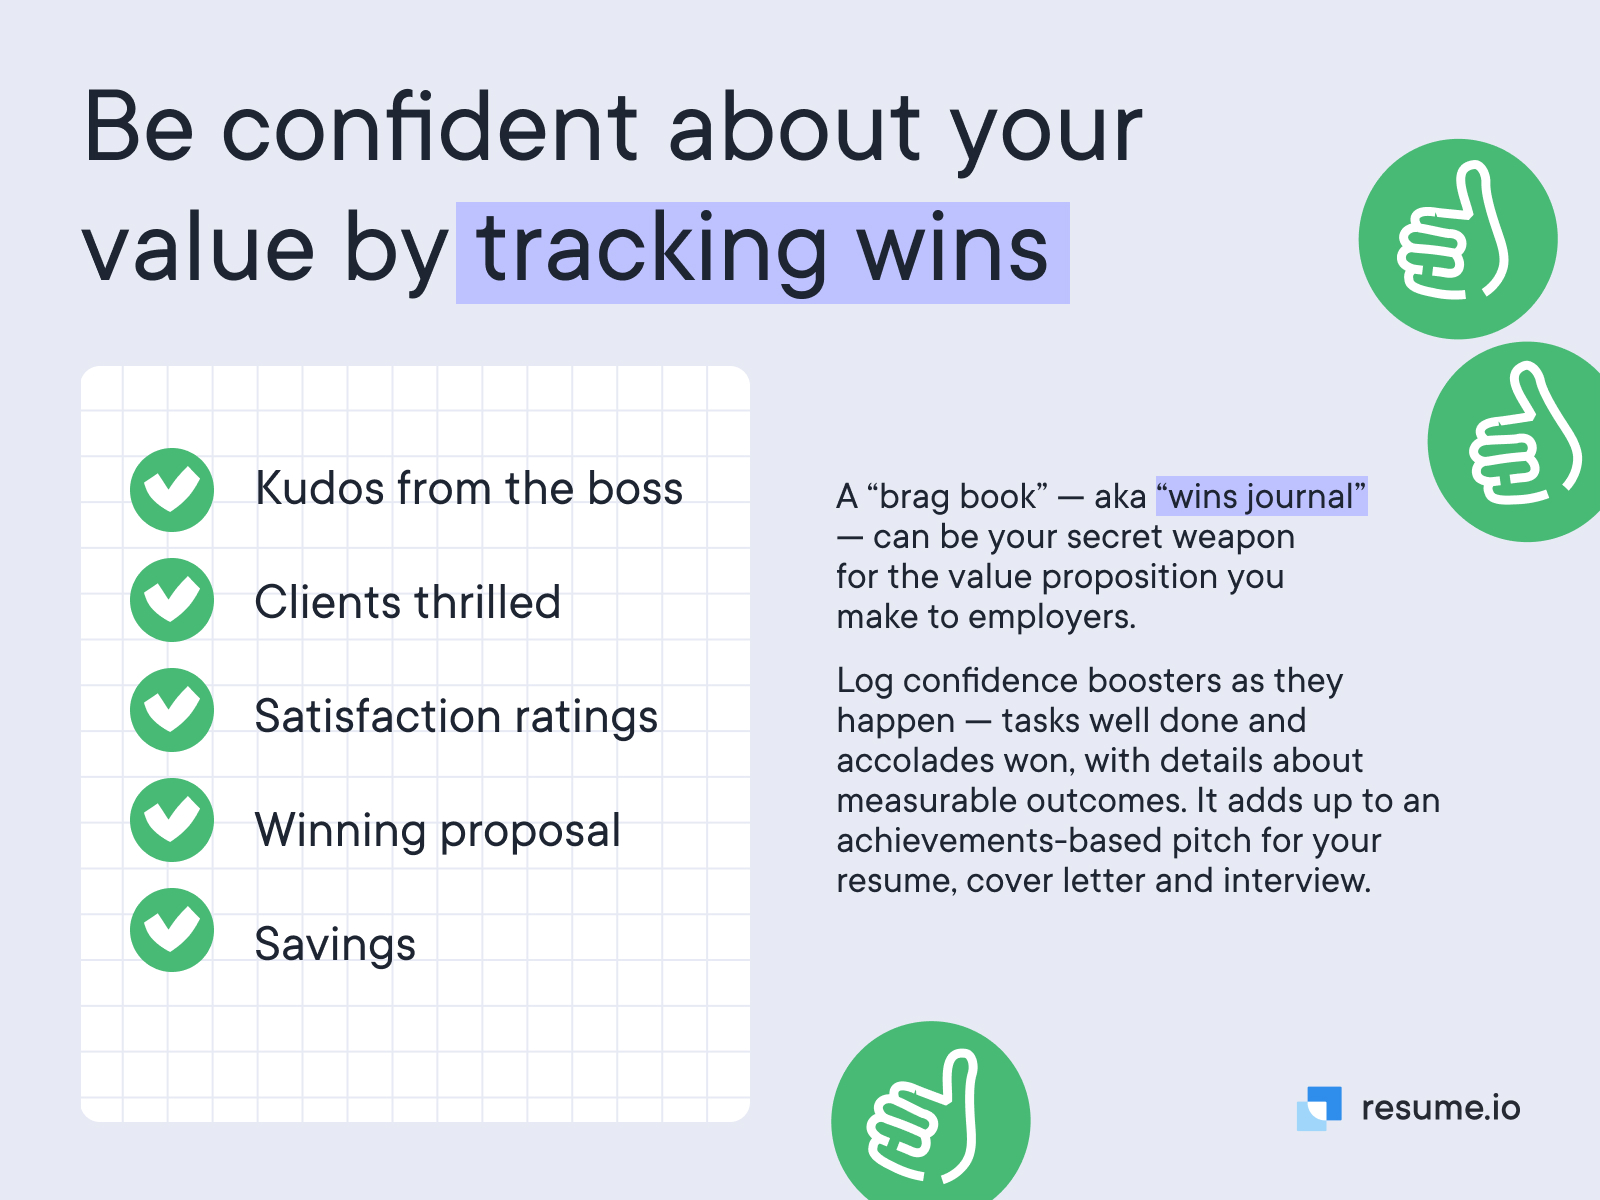 Be confident about your value by tracking wins